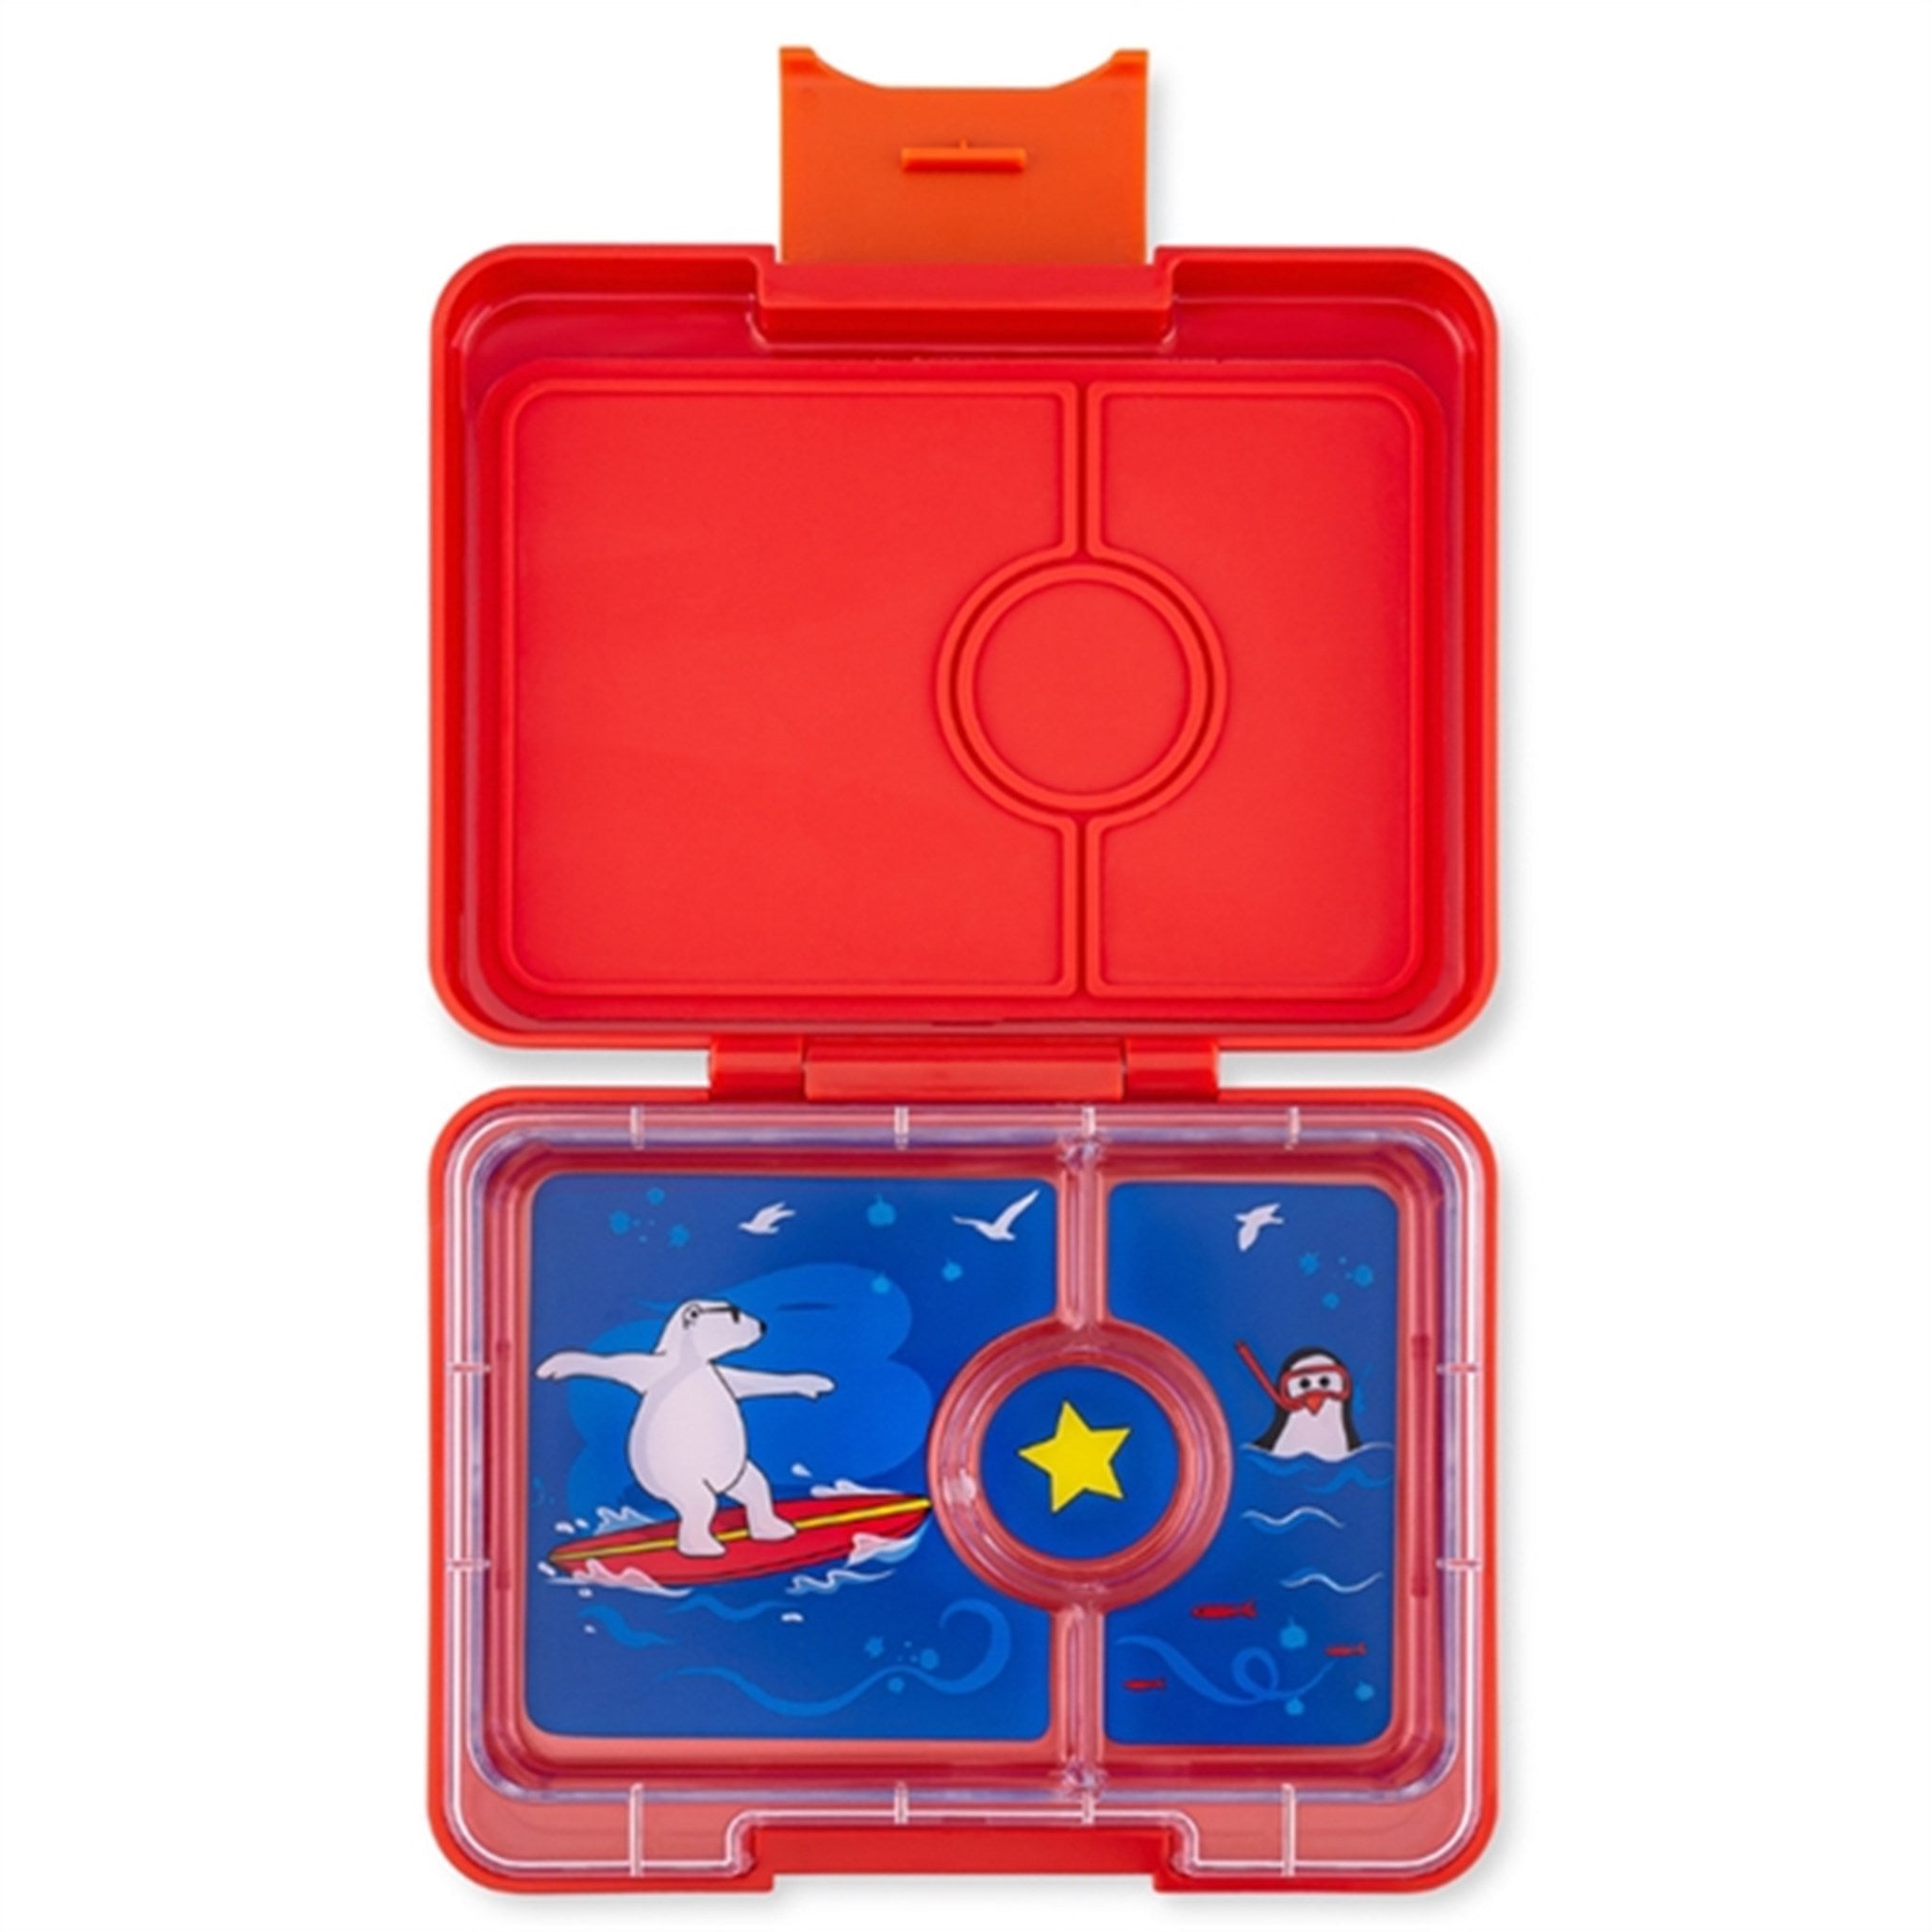 Yumbox Snack 3 sections Lunchbox Roar Red / Polar Bear Tray